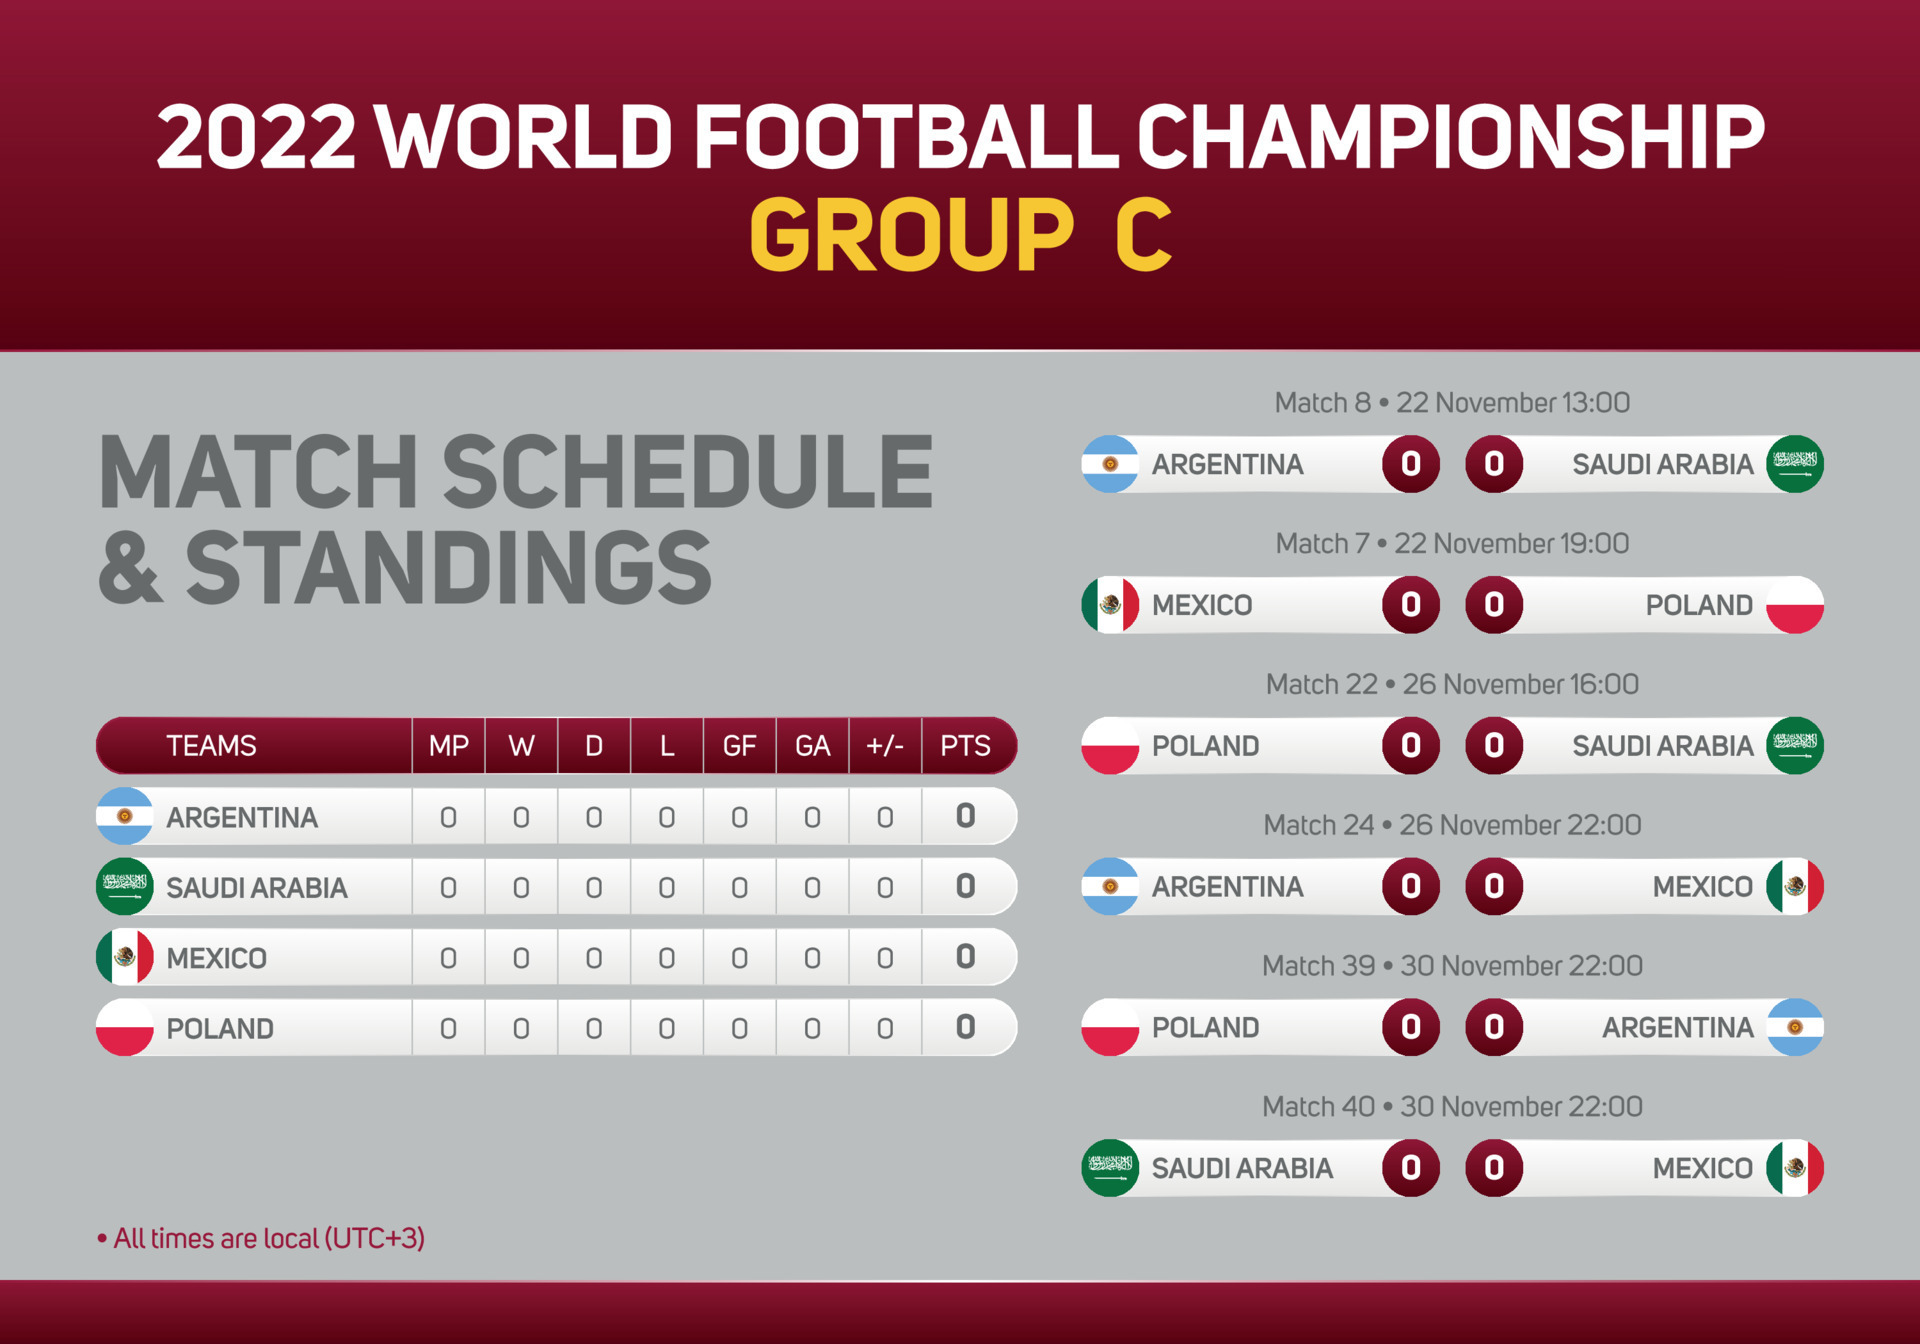 2022 Qatar World Football Championship Group C match schedule poster for print web and social media